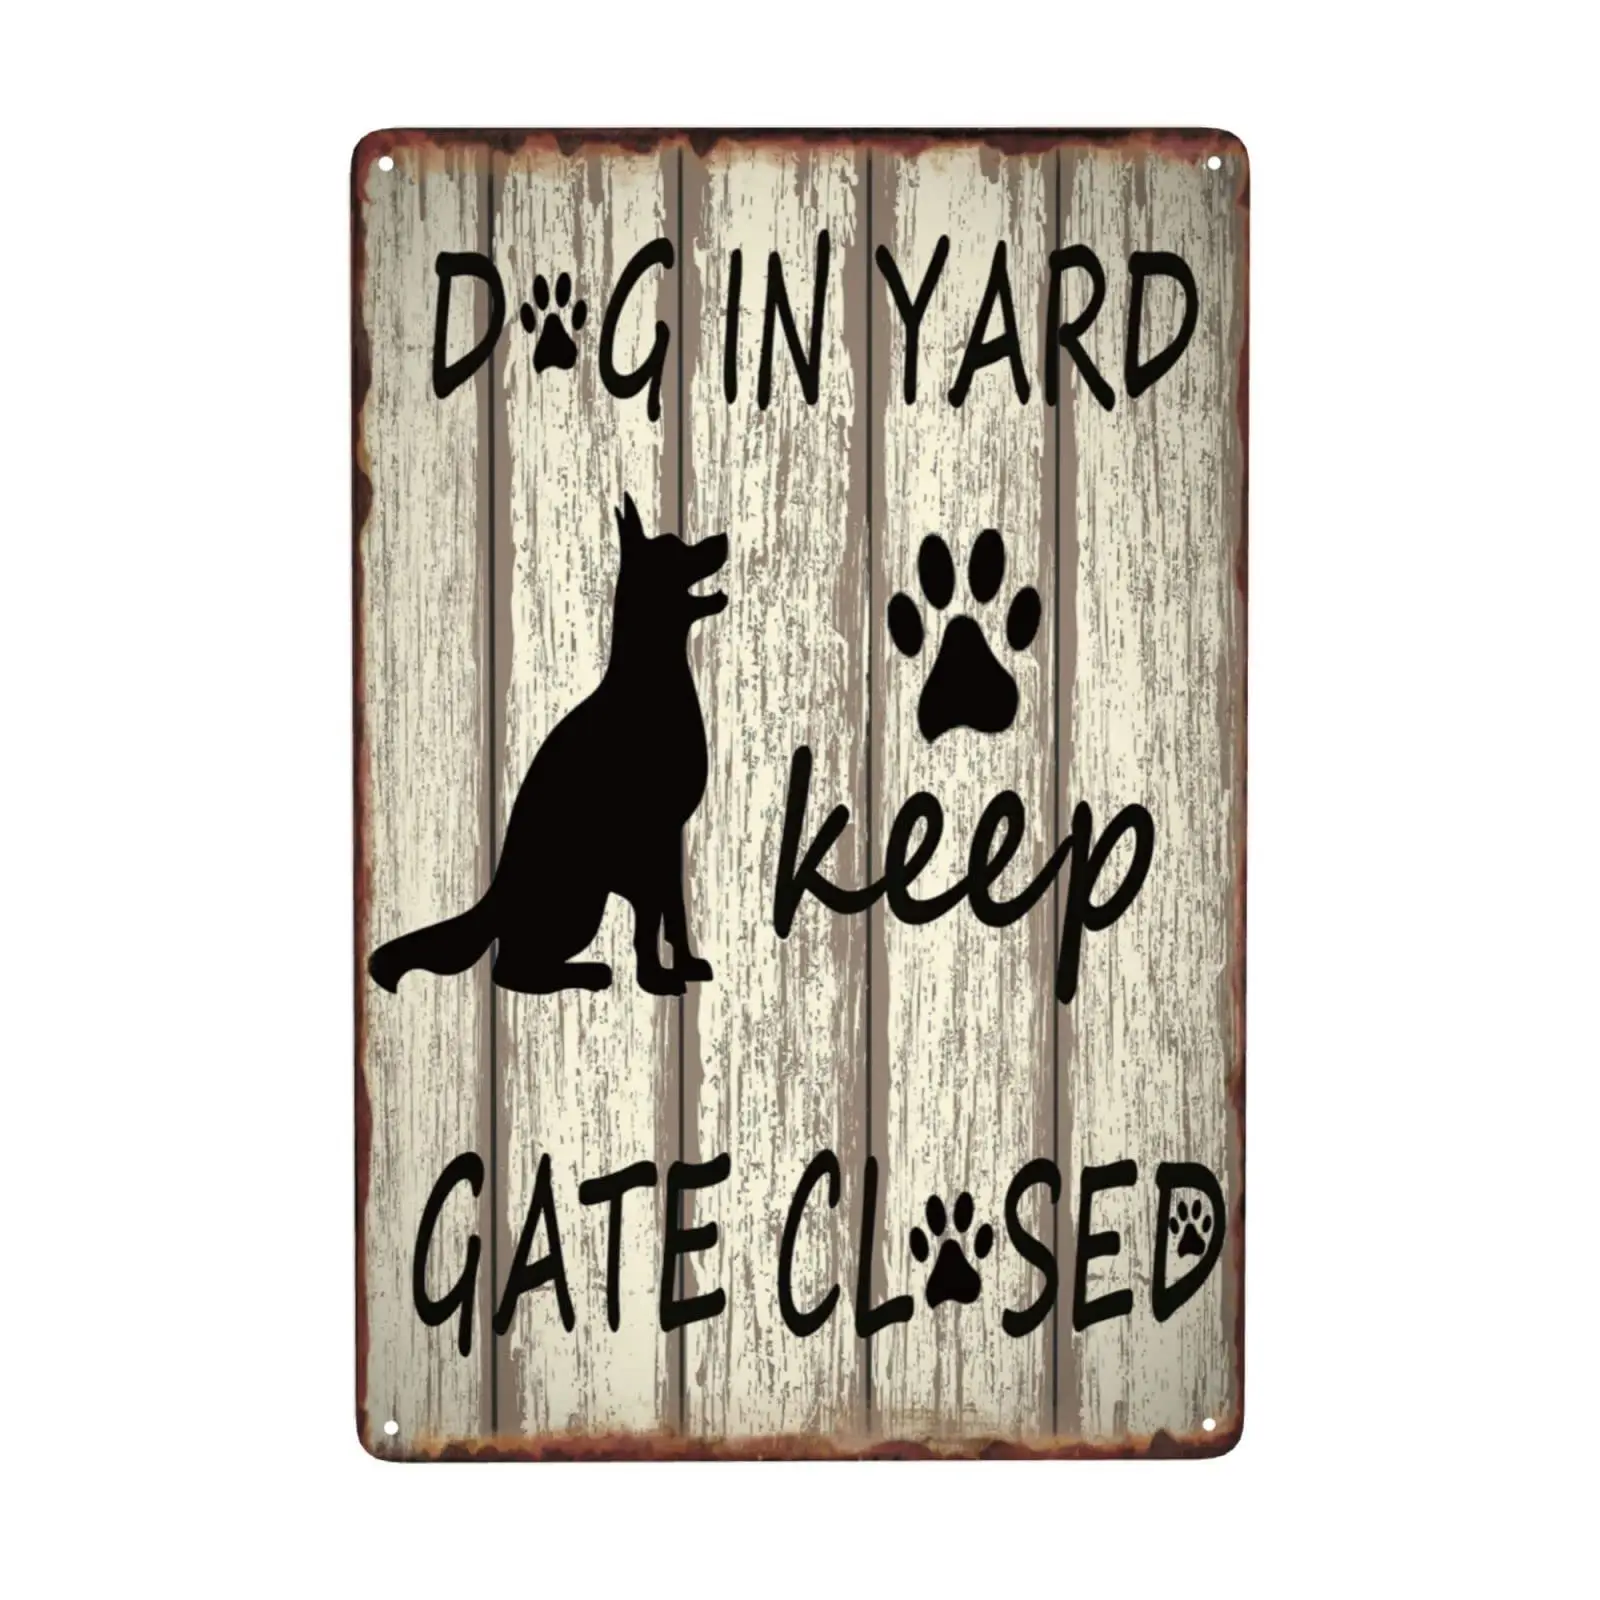 

Dog In Yard Keep Gate Close Tin Sign Metal Vintage Wall Decor Country Home Bar 8x12inches